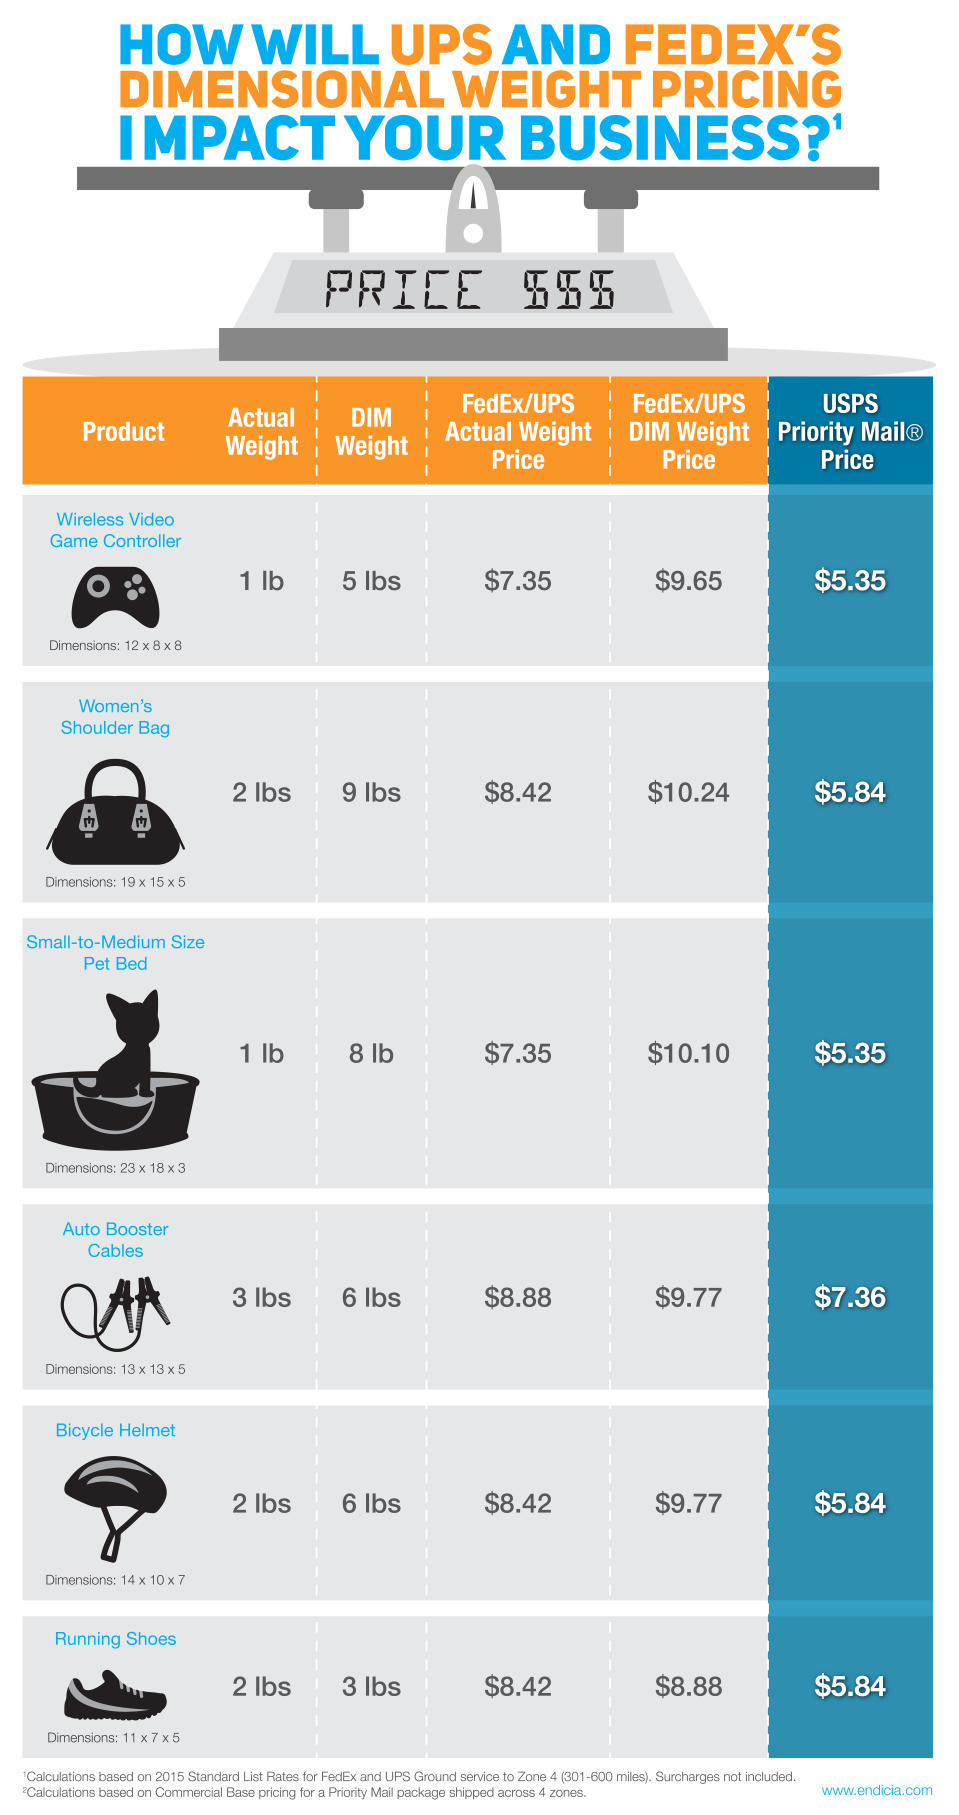 Will Dimensional Weight Pricing Impact Your Business? Use this Shipping Rates Comparison Chart to Find Out! [Infograhpic] image FedEx vs. UPS vs. USPS shipping rates comparison chart dimensional weight pricing